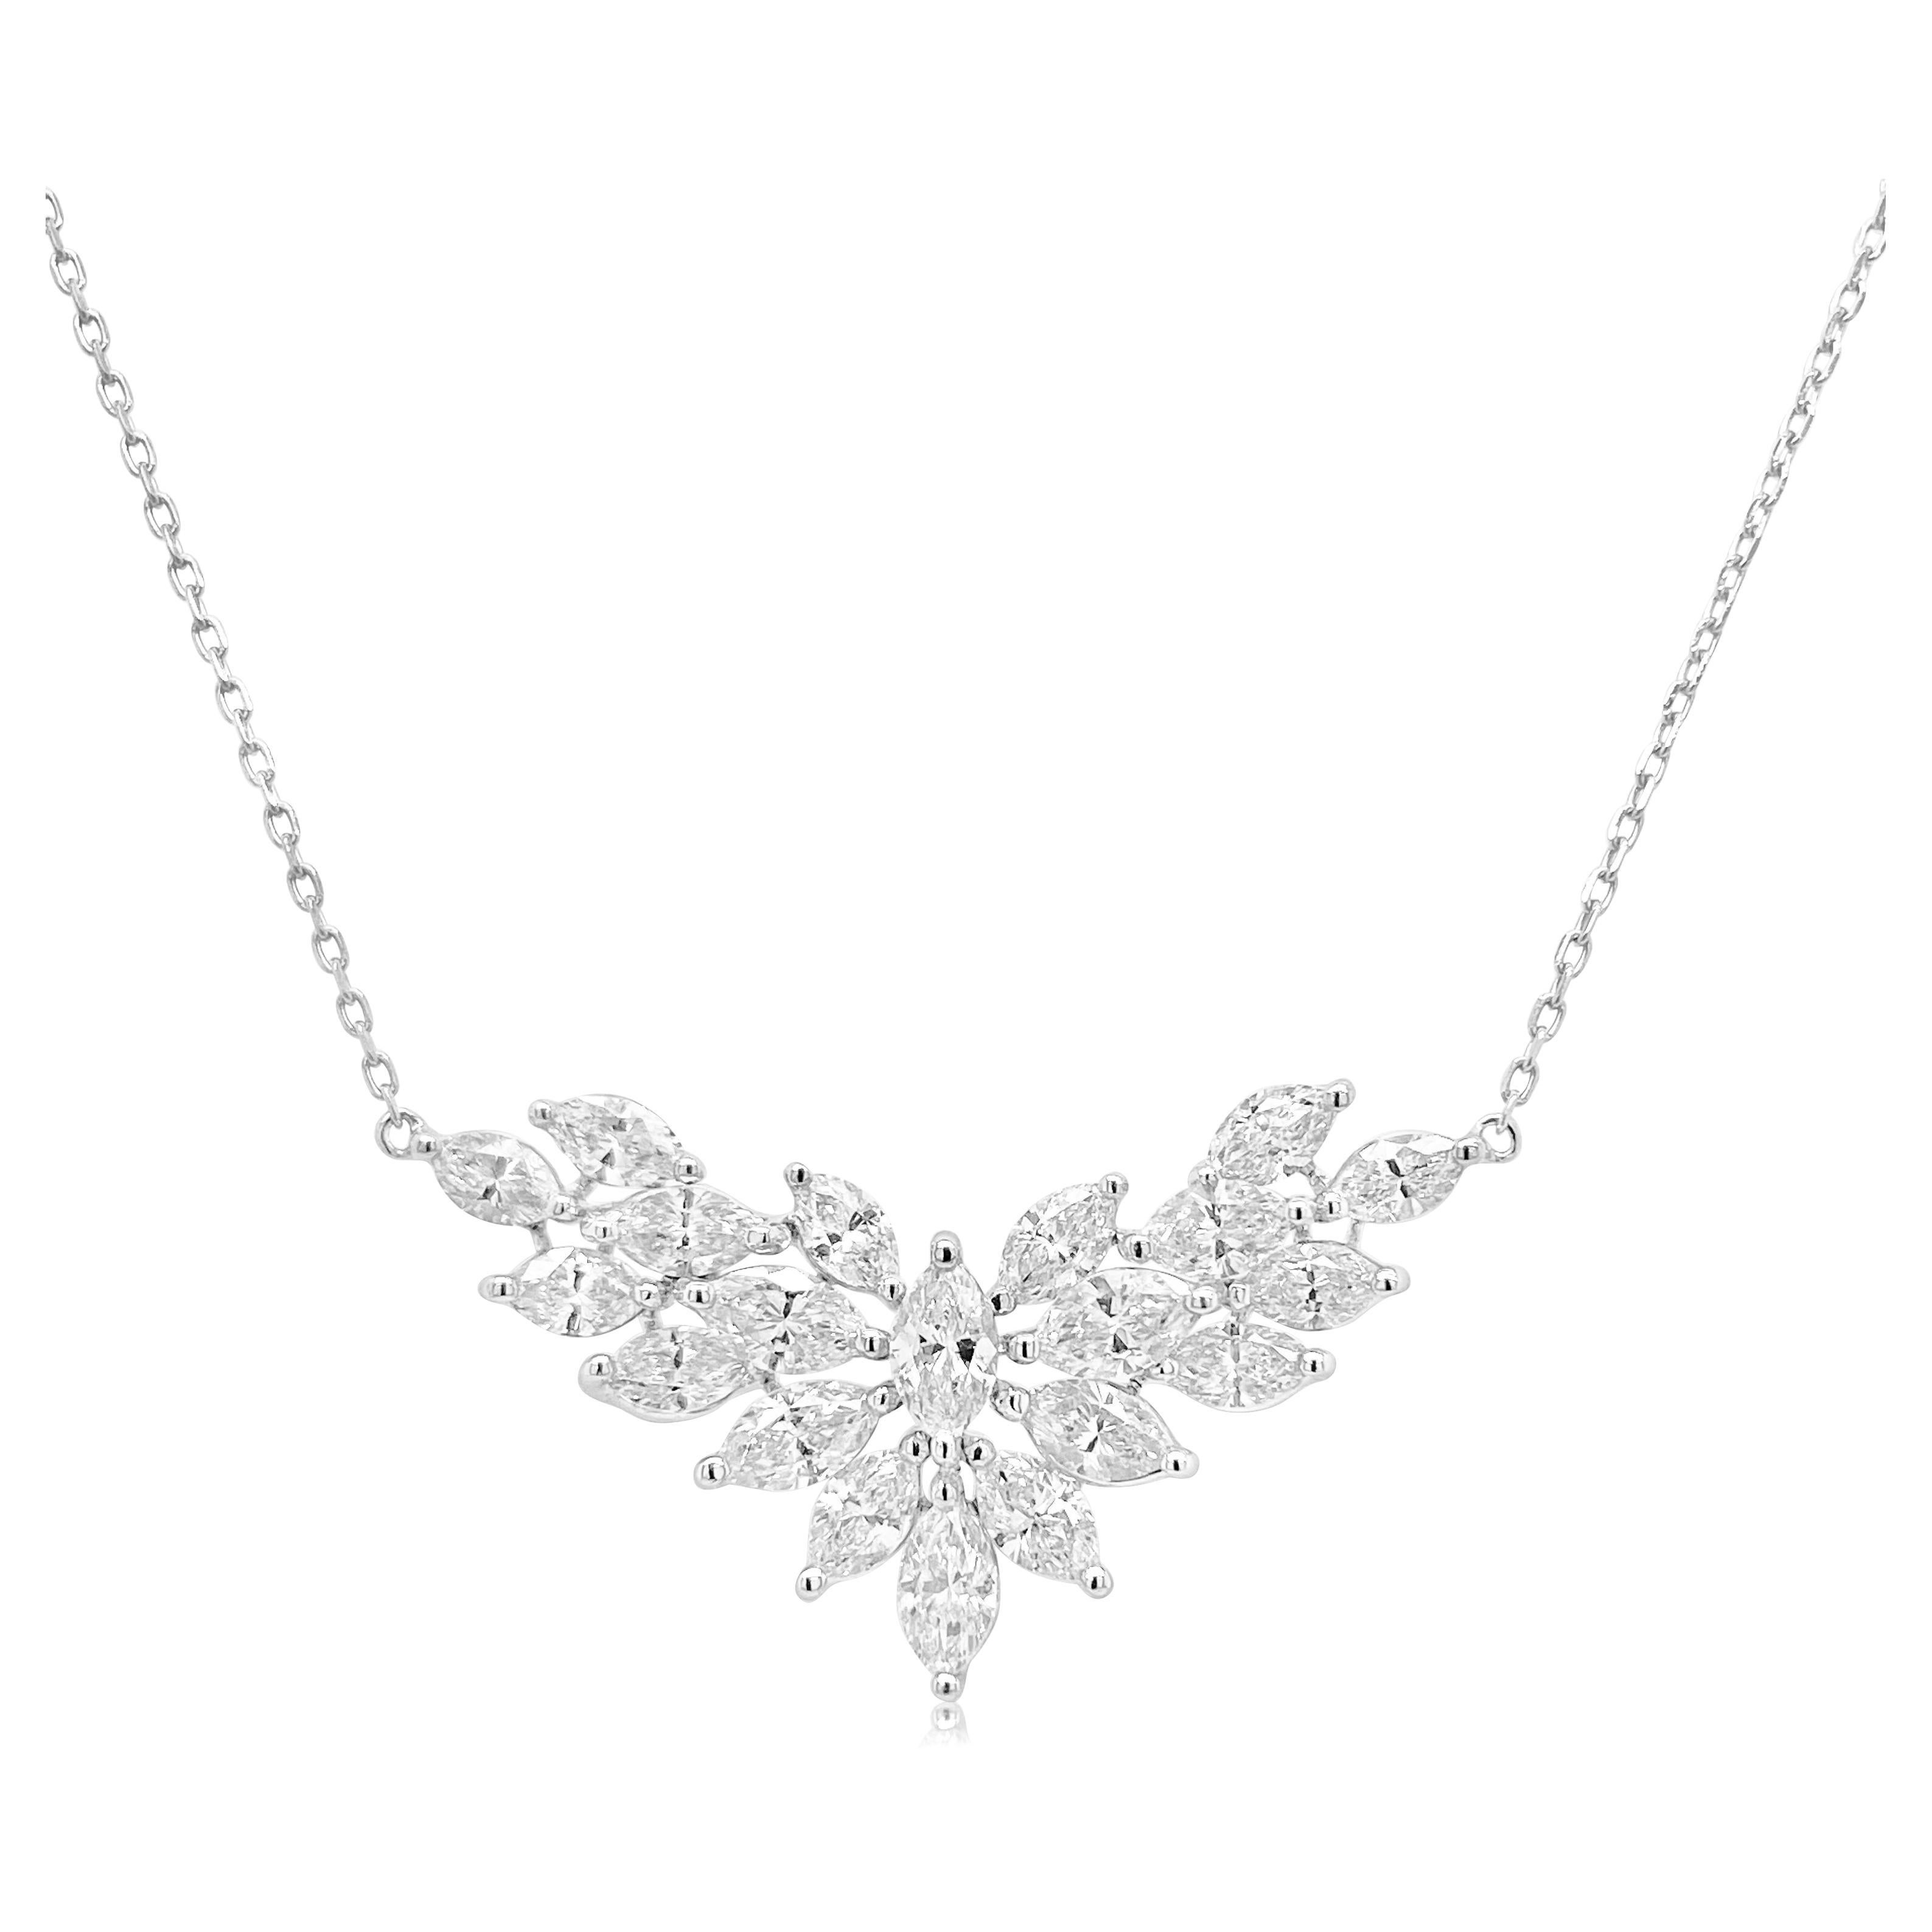 Marquise diamond Necklace with Platinum Chain For Sale